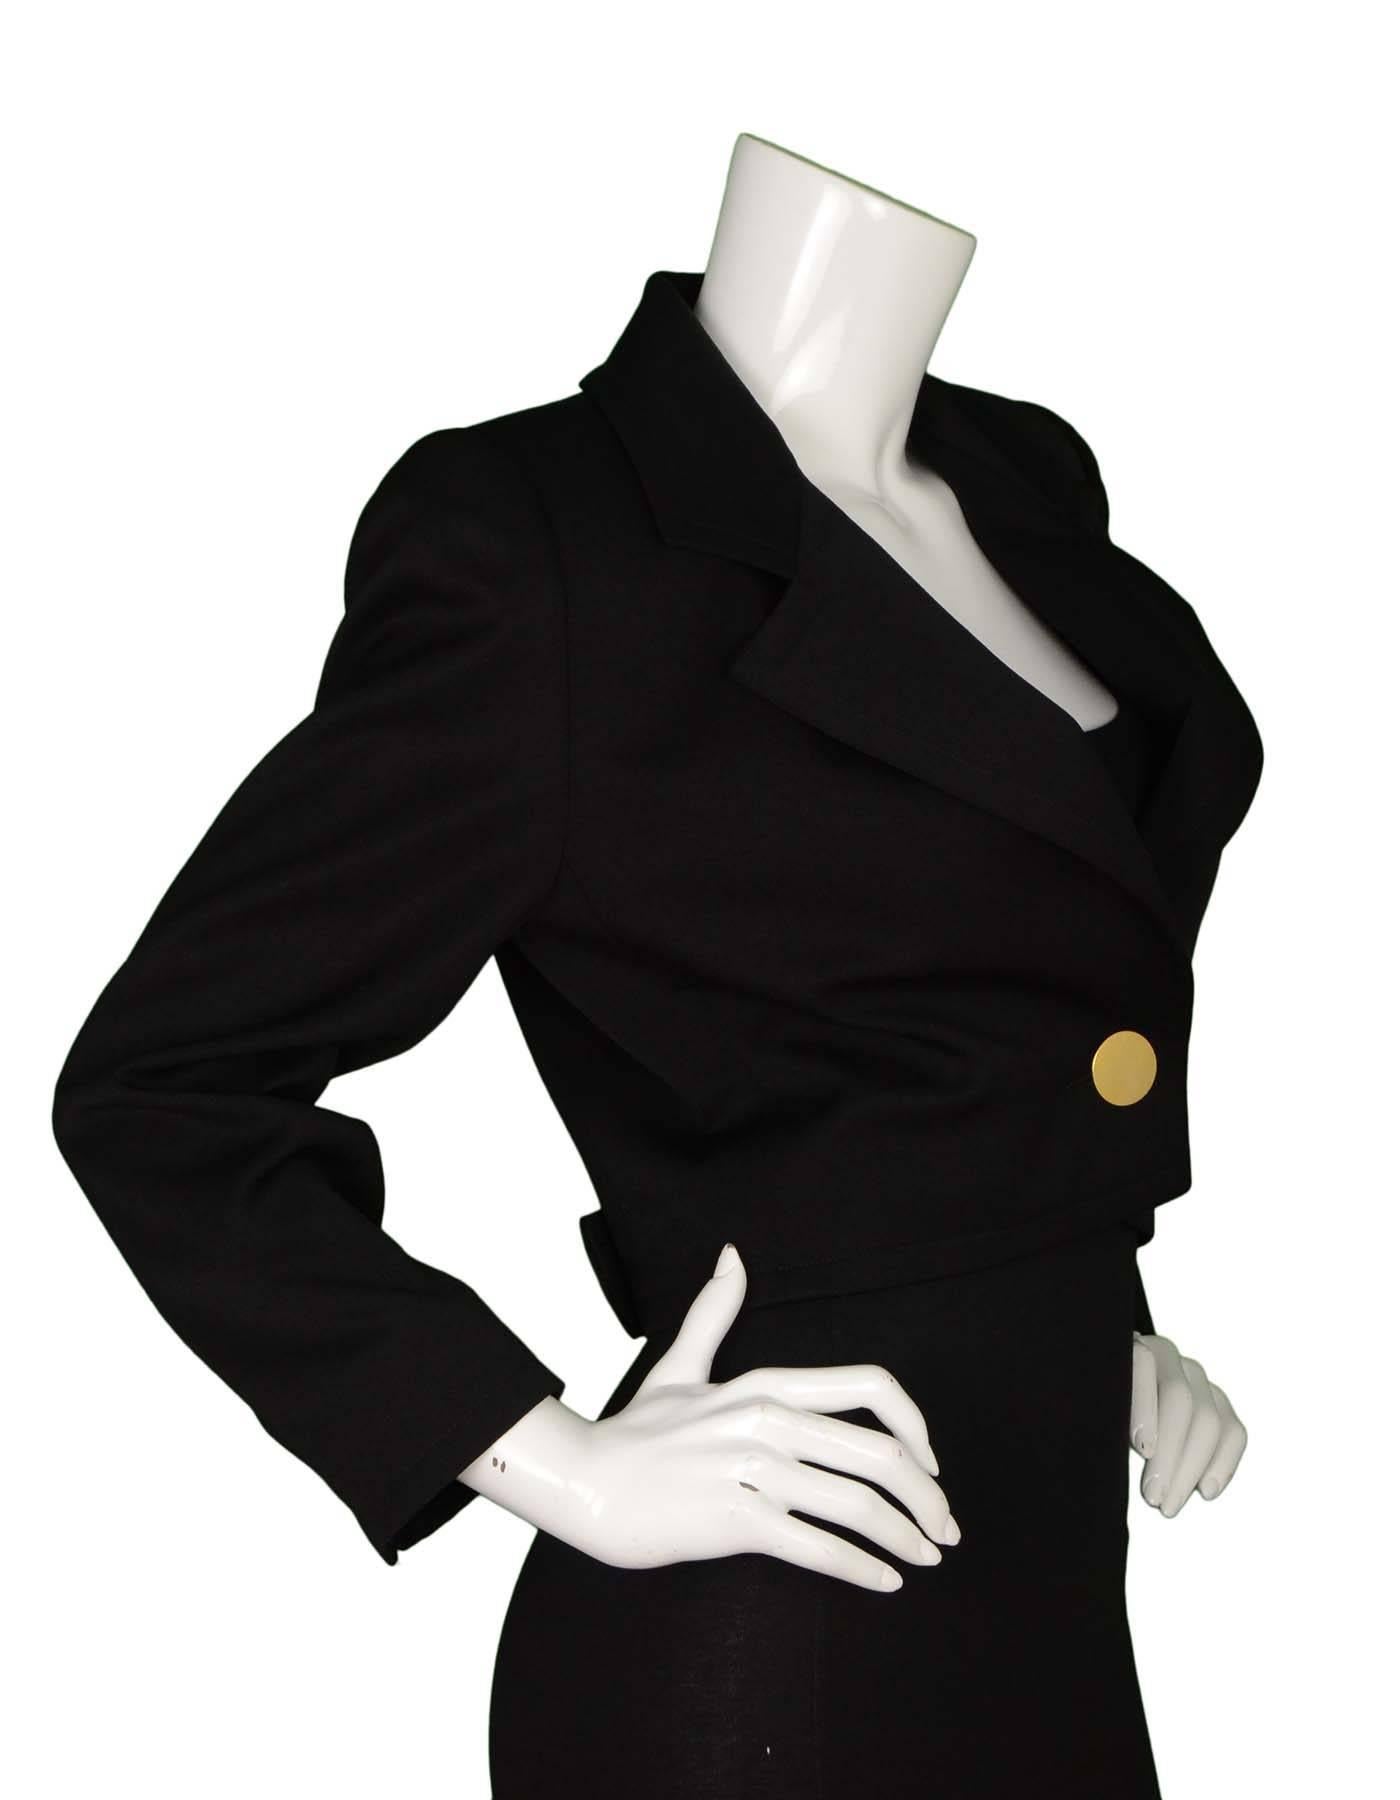 Givenchy Vintage Black Cropped Jacket 
Features padding in shoulders and one large goldtone button
Made In: France
Color: Black
Composition: Believed to be a wool-blend
Lining: Black, silk-blend
Closure/Opening: One front button
Exterior